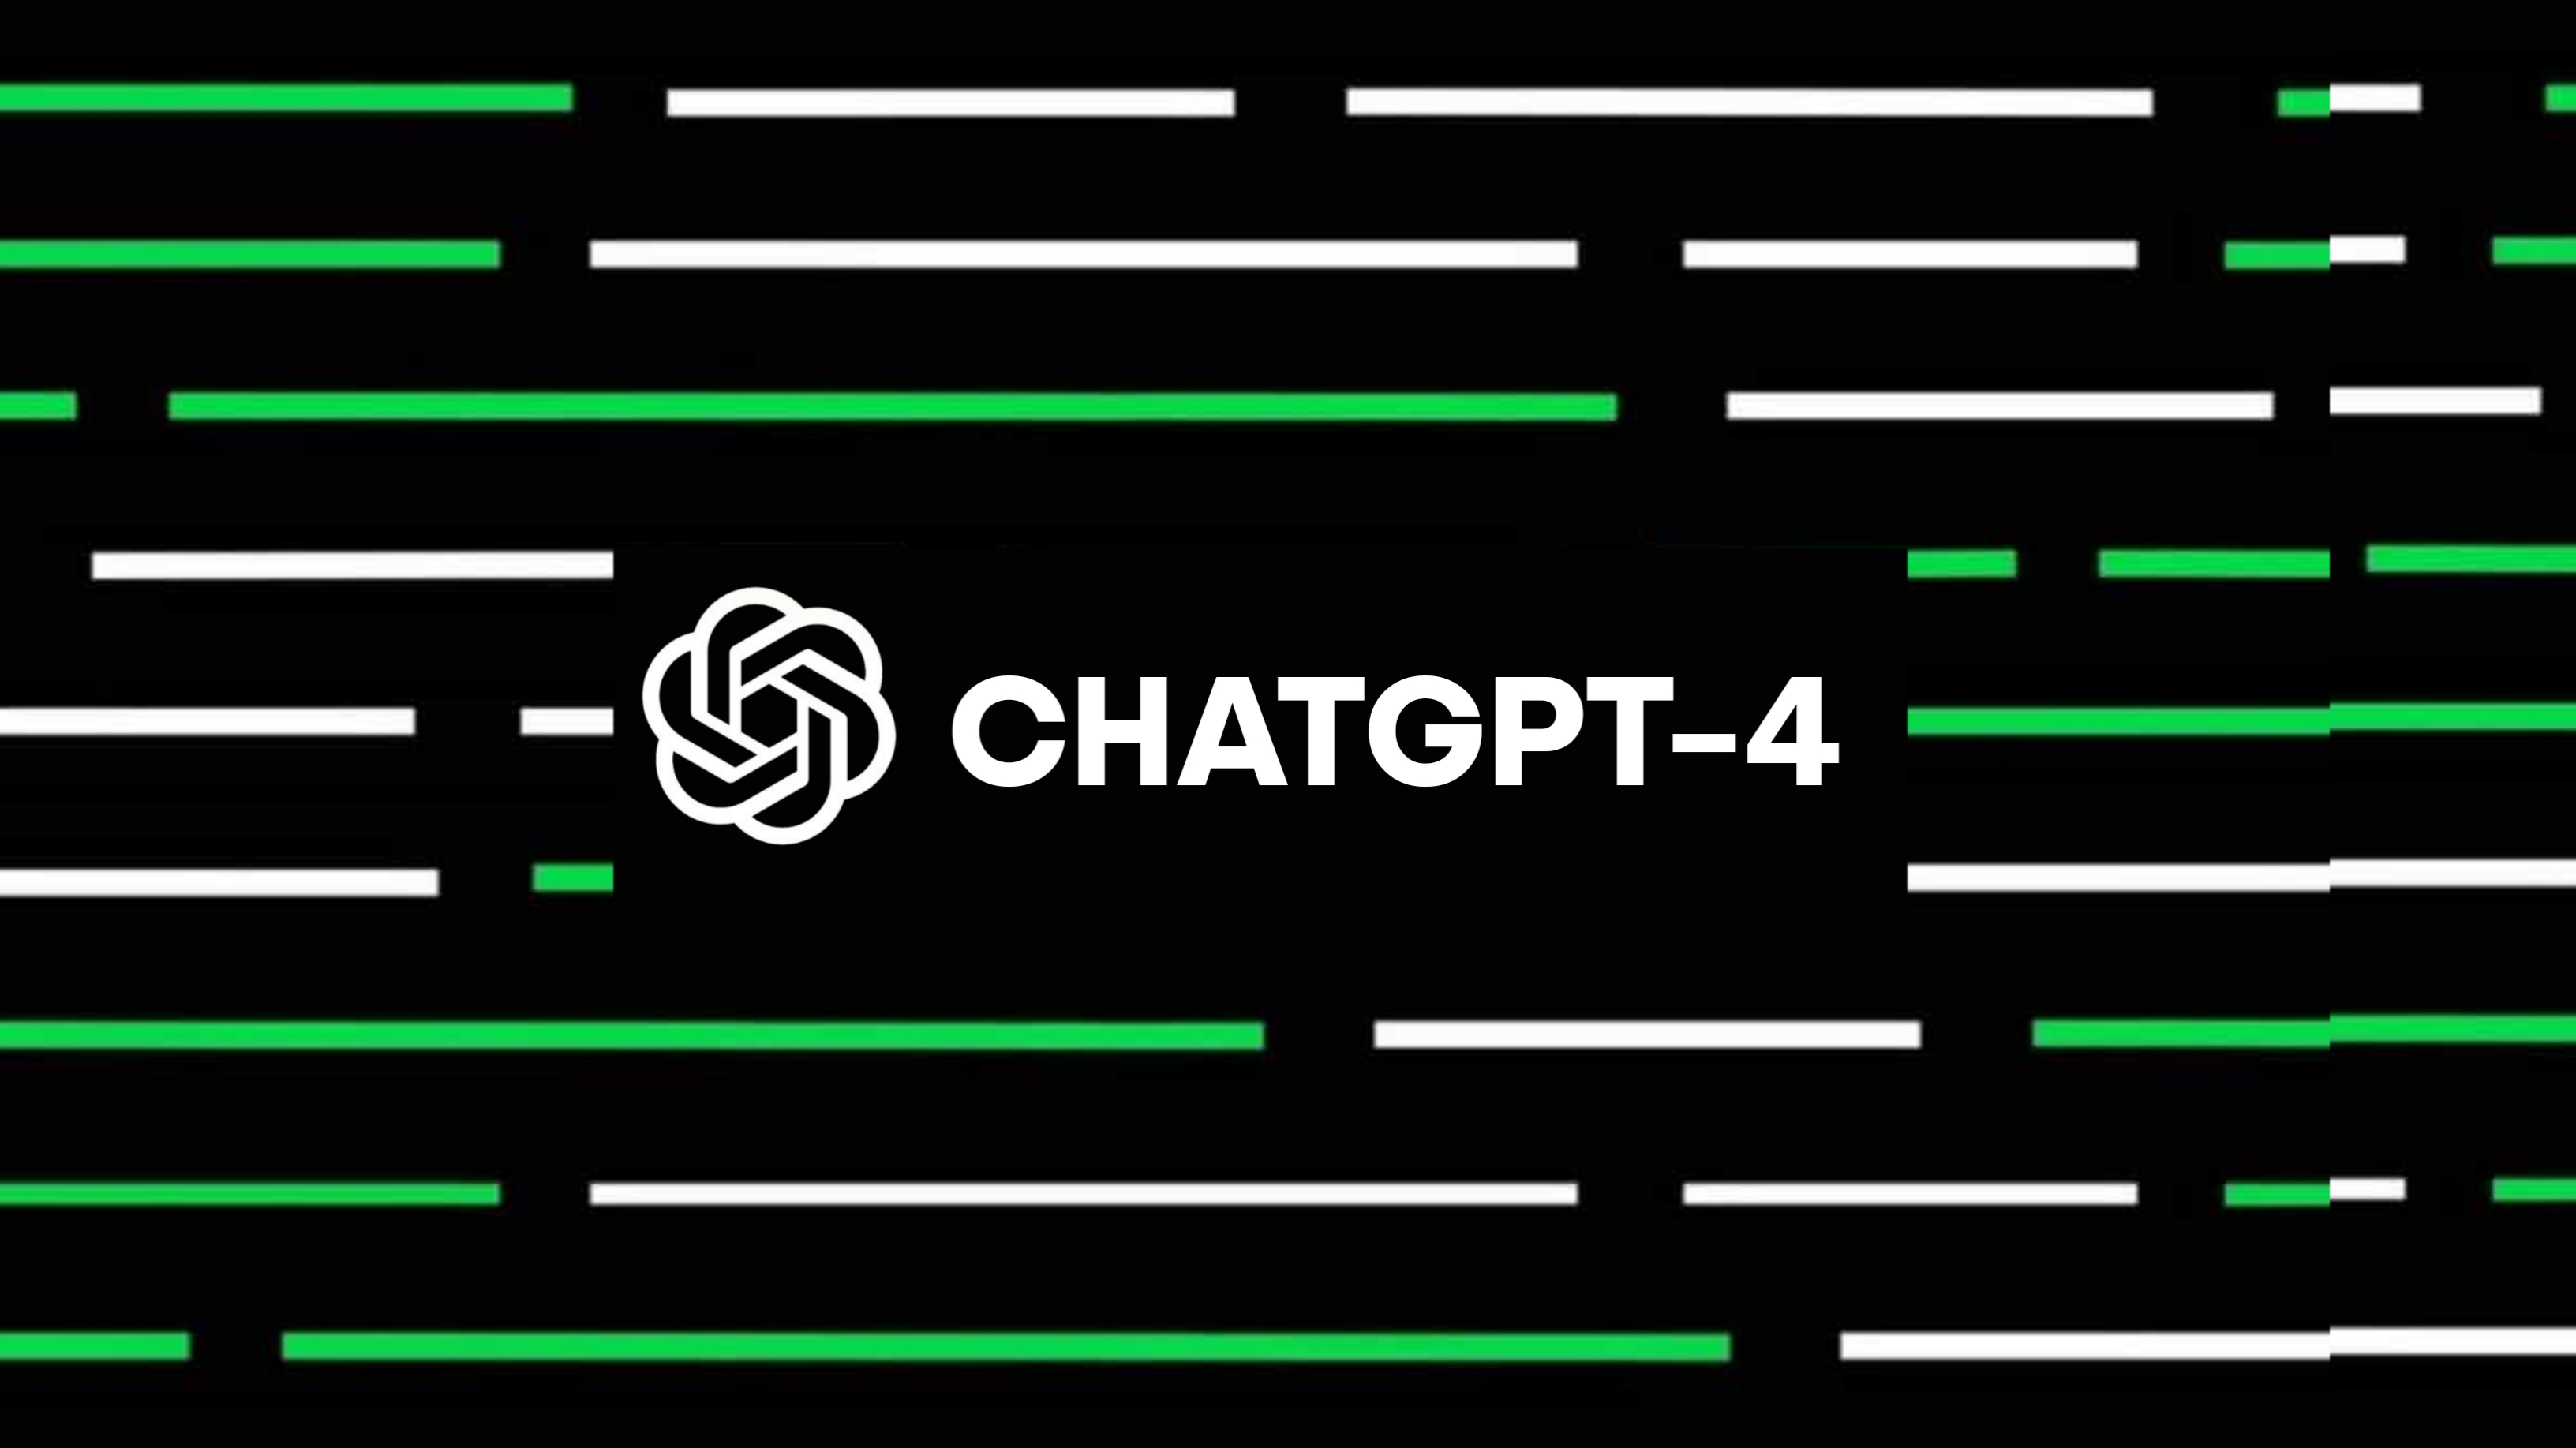 How to access ChatGPT-4